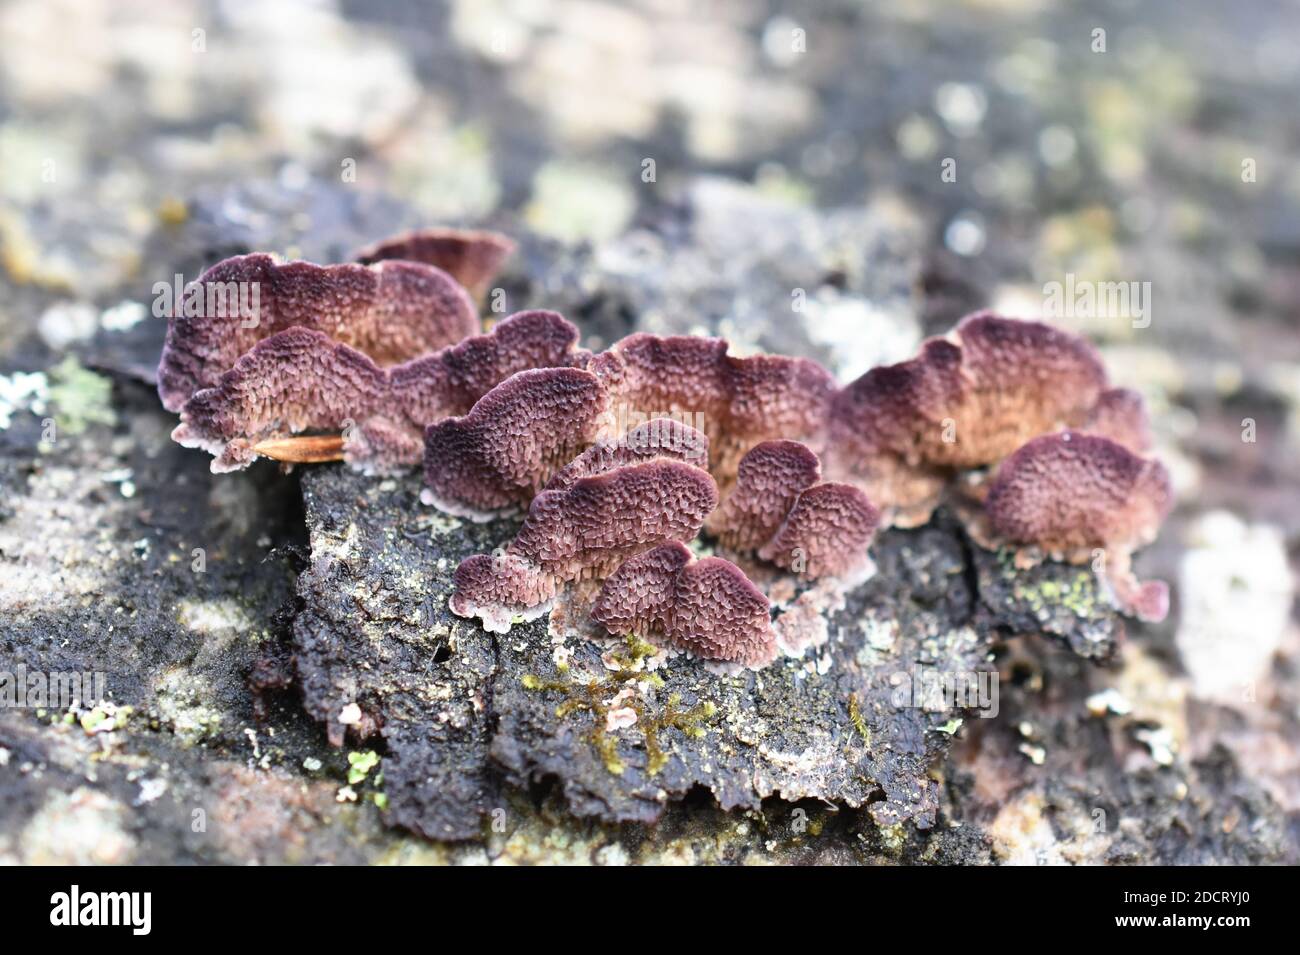 The saprophytic fungus Trichaptum abietinum growing on the bark of a conifer tree showing underside Stock Photo